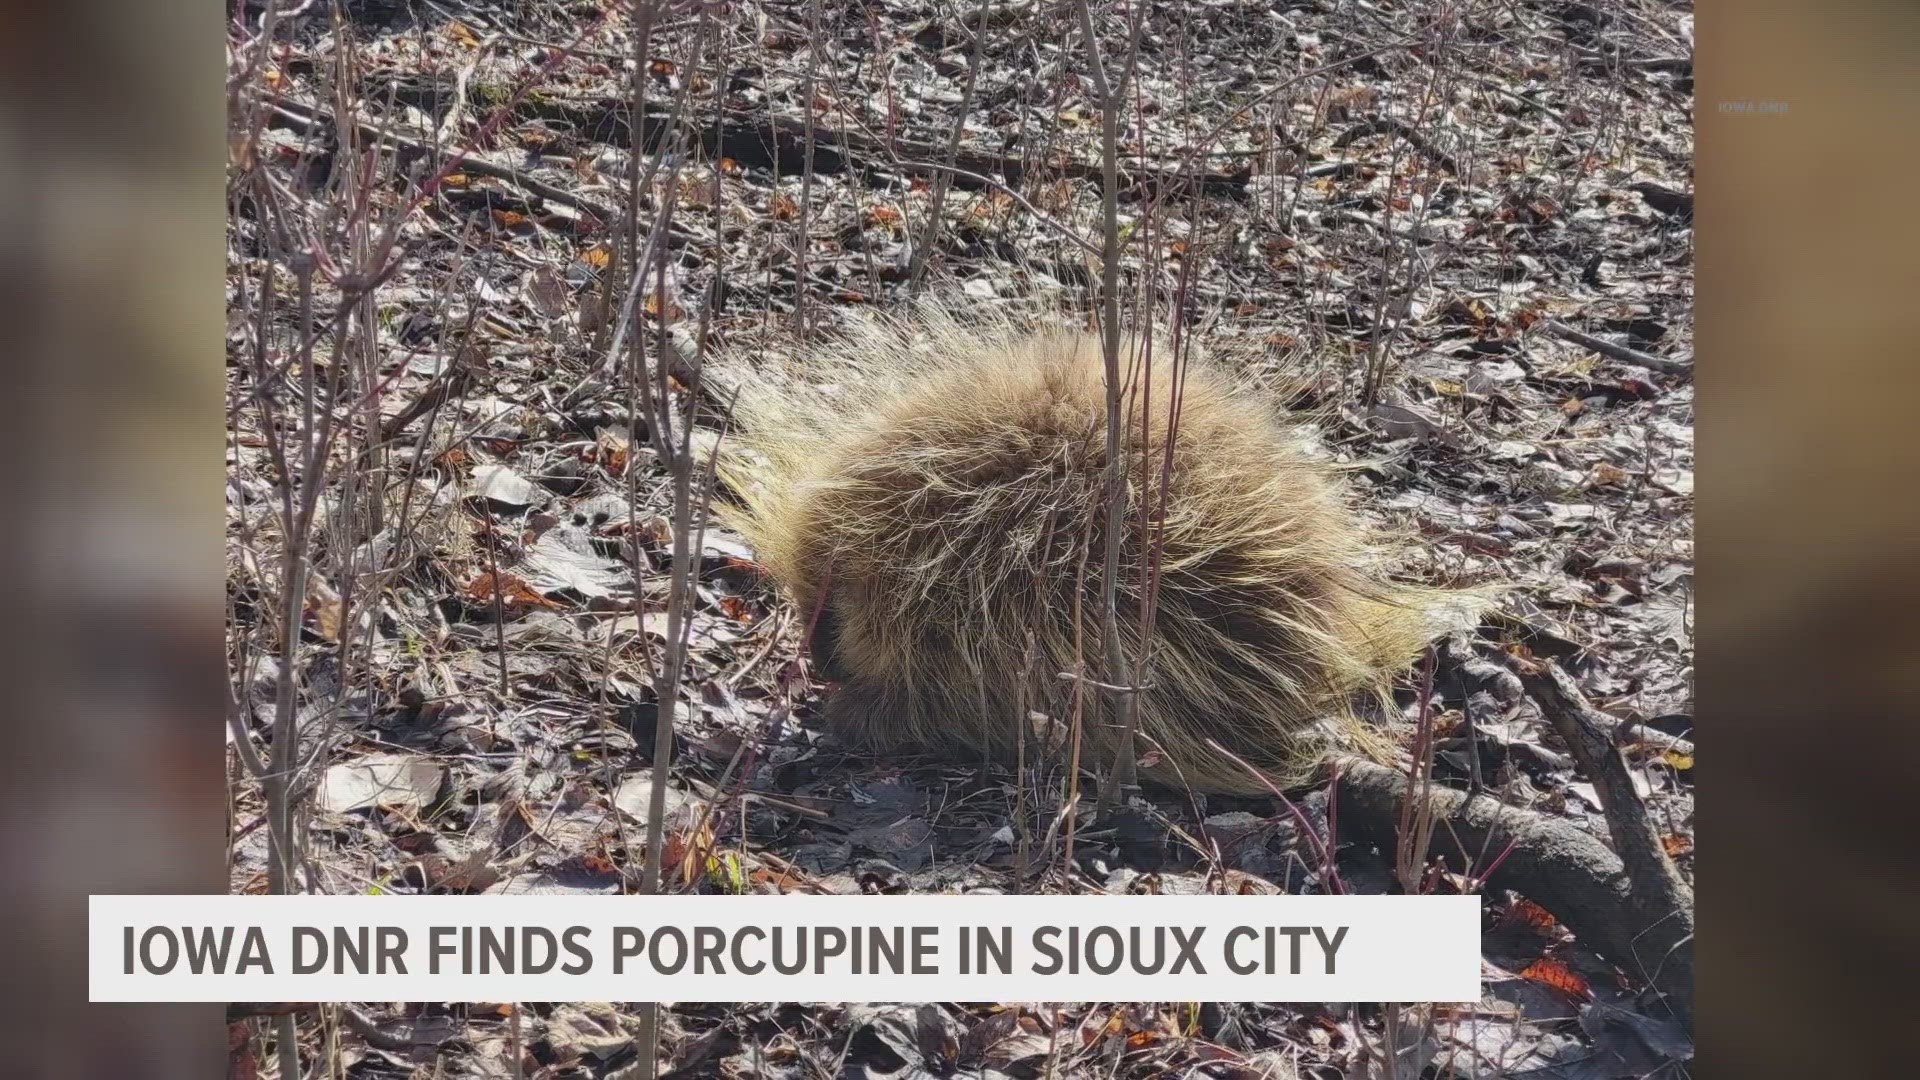 While porcupines are occasionally found in Iowa, Iowa DNR reports that they mainly live in forests in states north and west of Iowa.